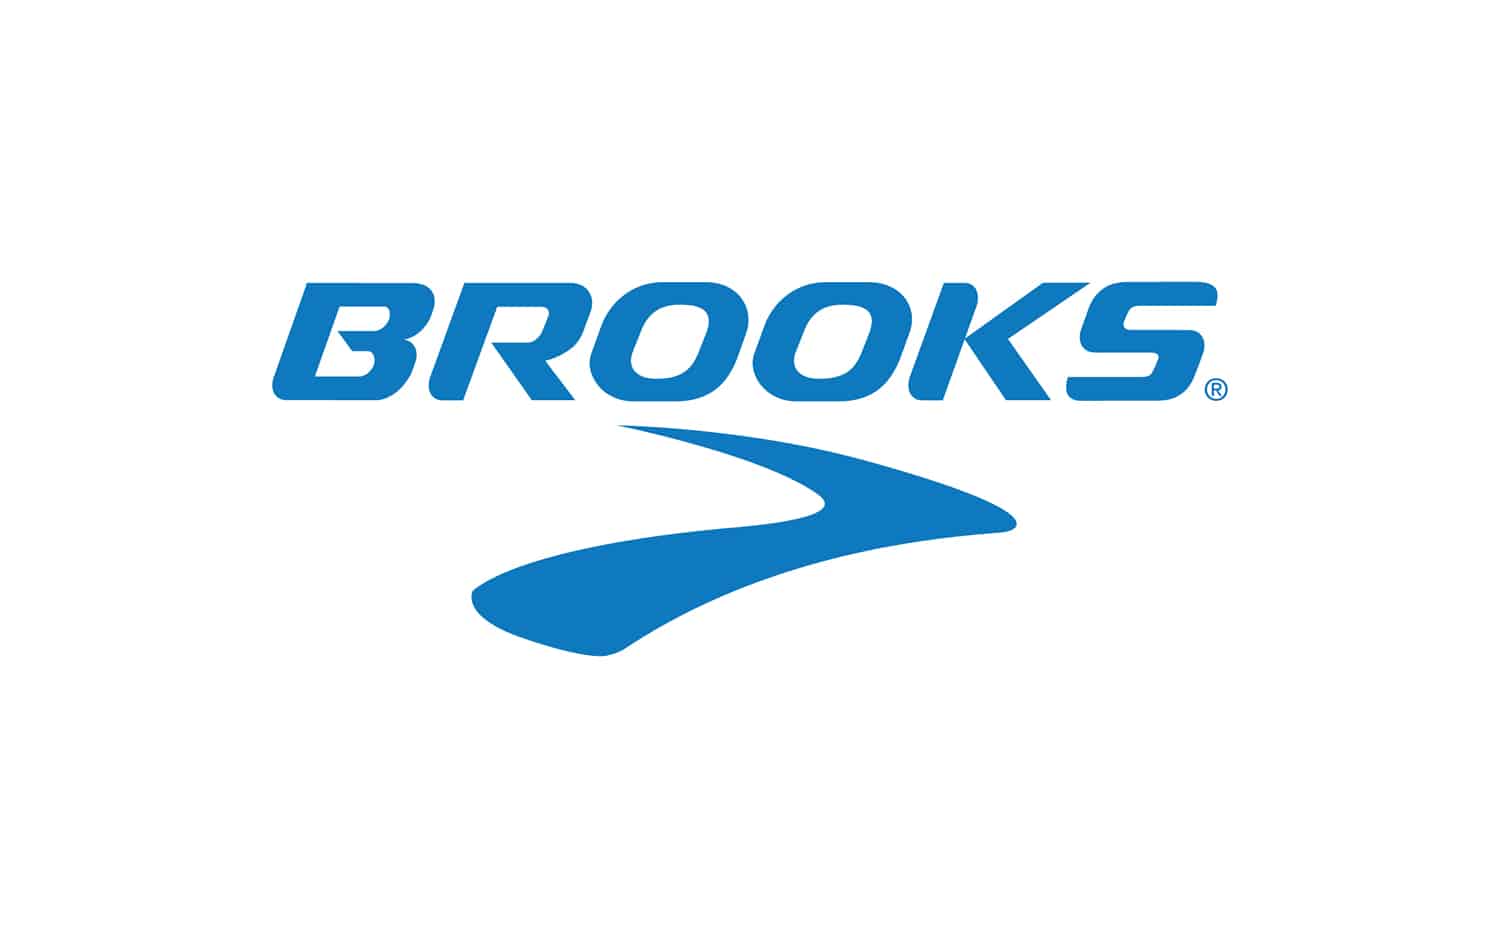 The Best Brooks® Walking Shoes 